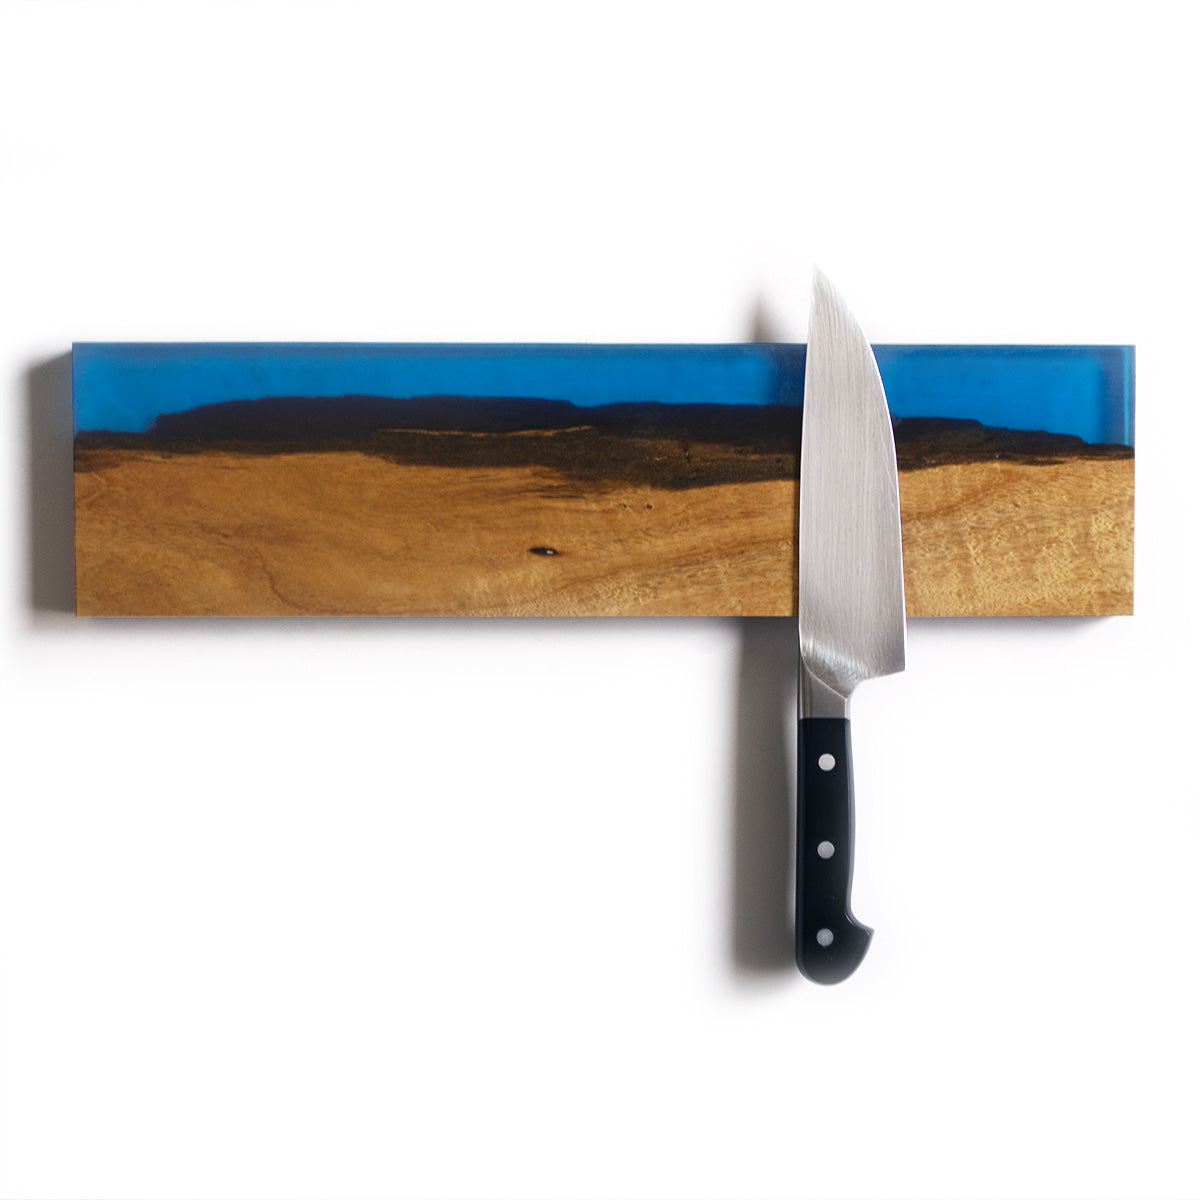 magnetic knife holder made with salvaged live edge acacia hardwood and translucent sjy blue epoxy resin